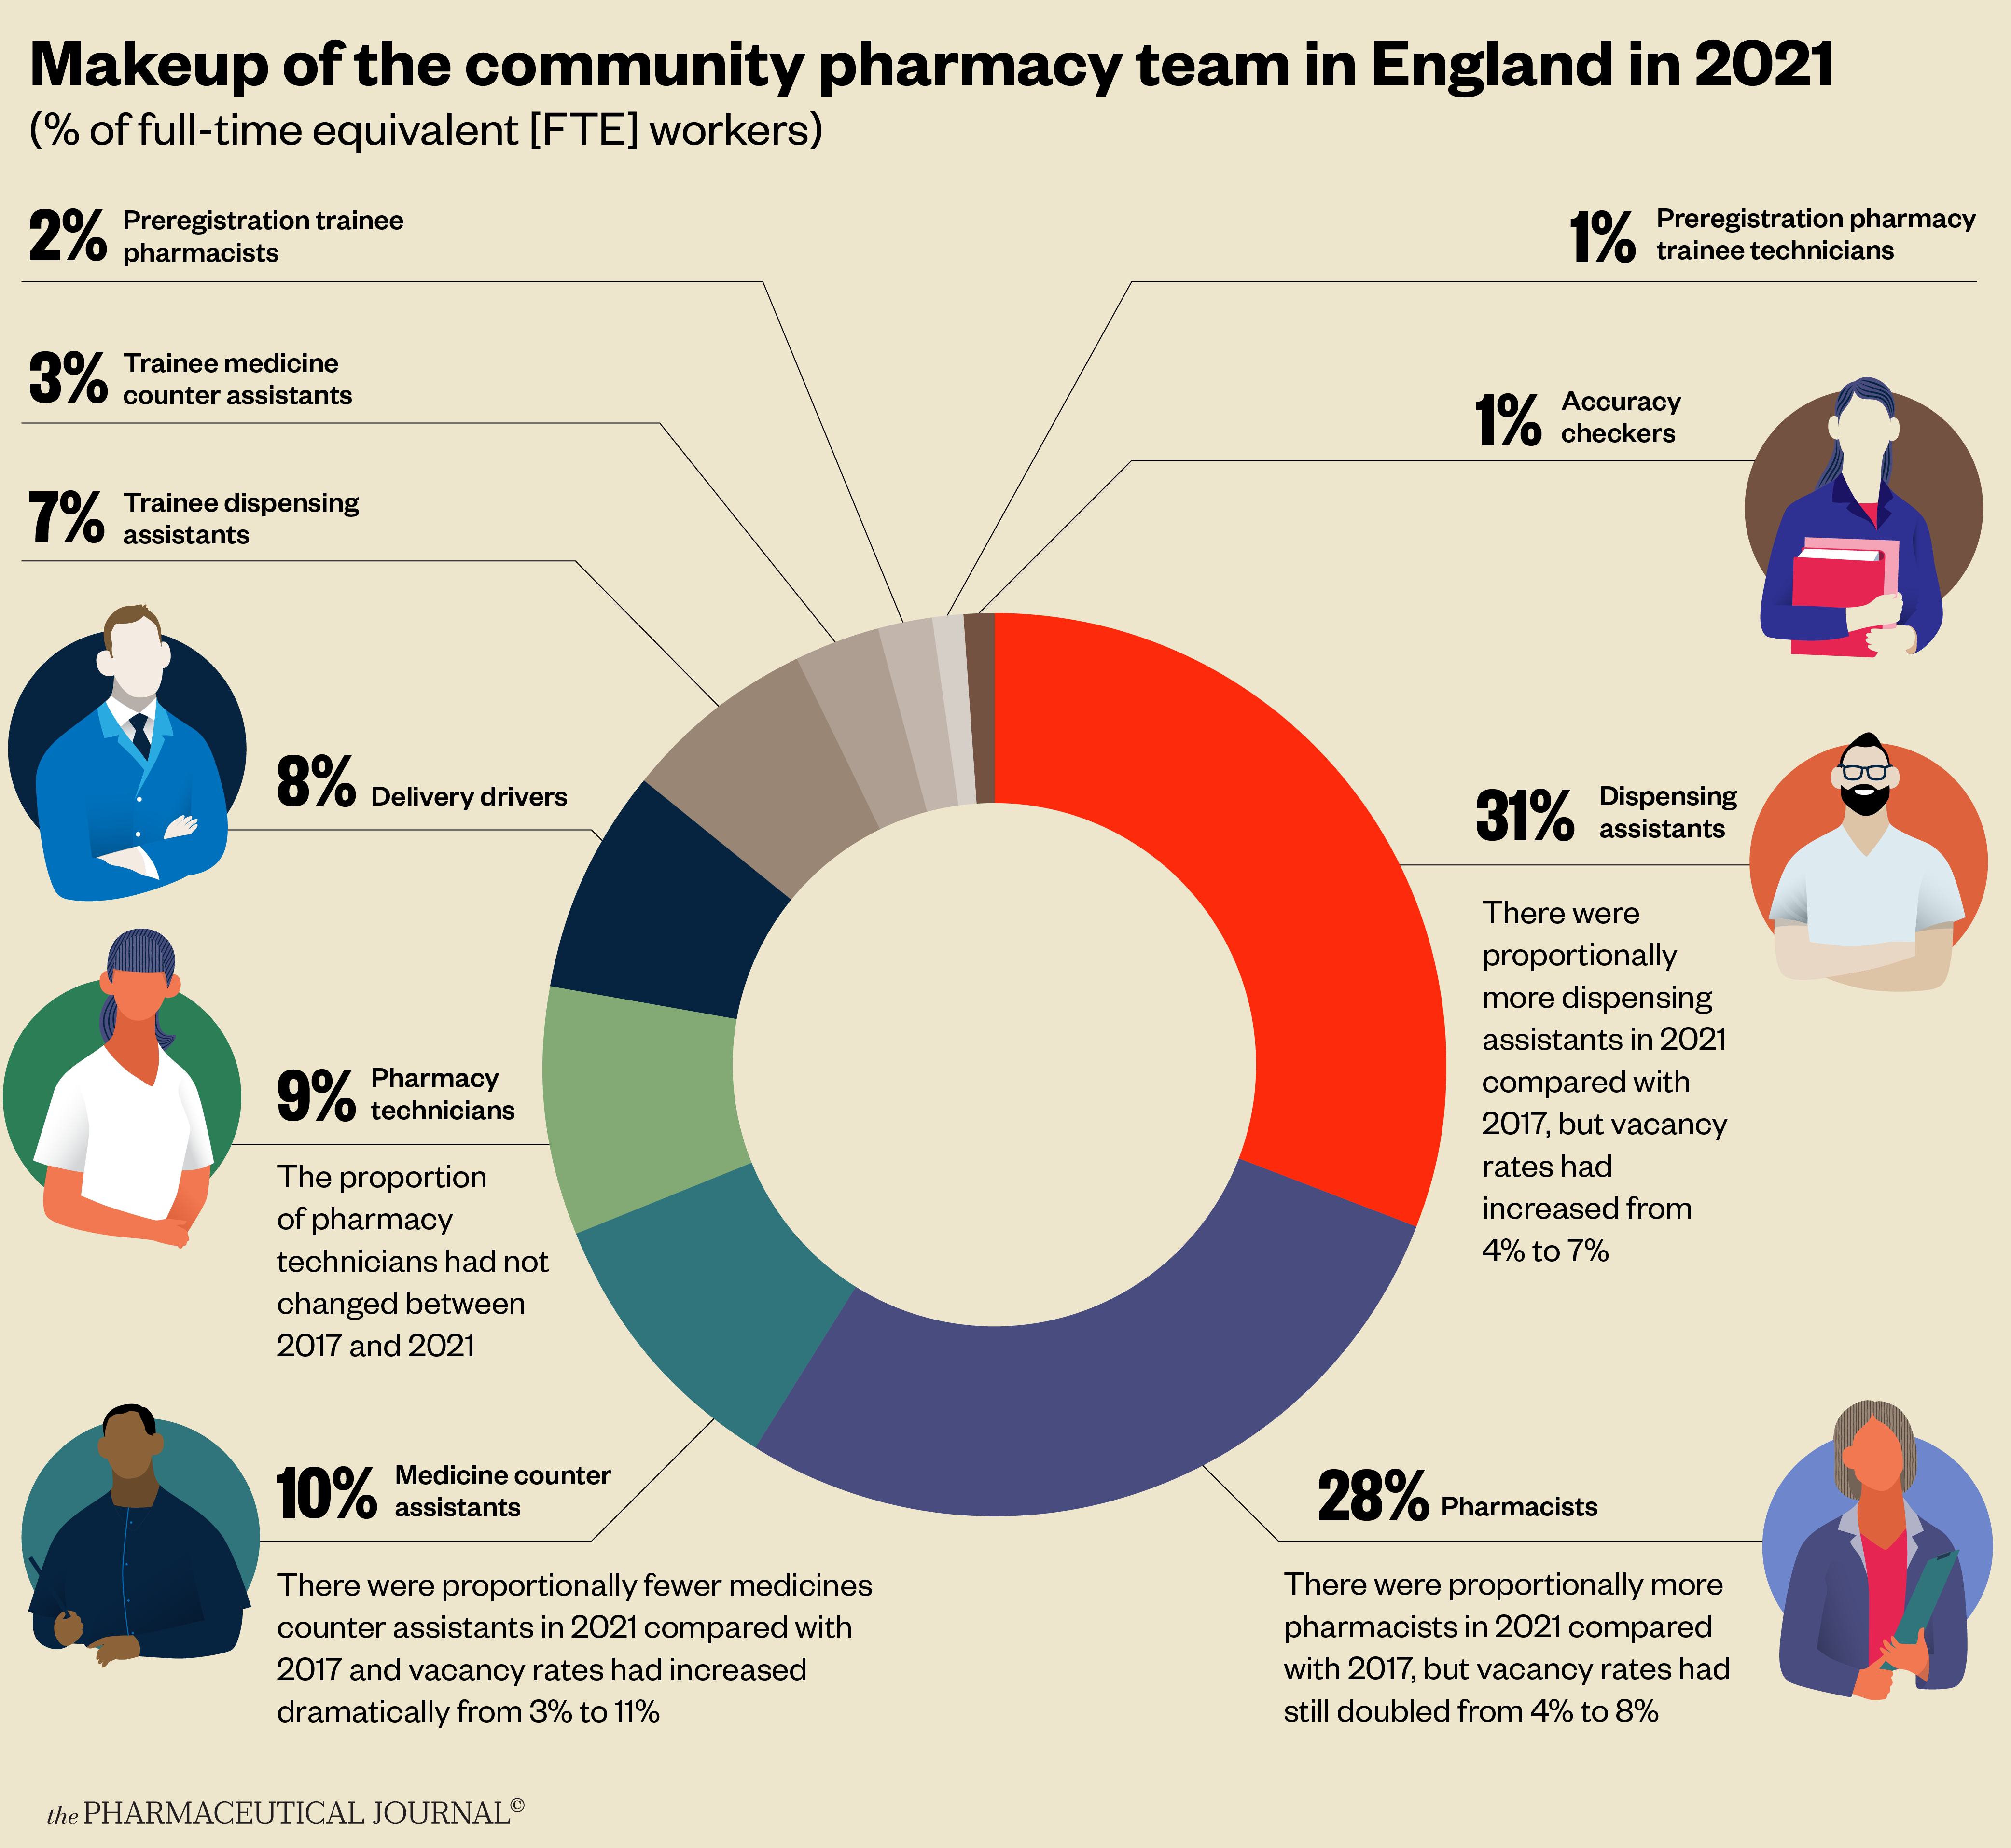 workforce-pharmacists 1_Makeup of the community pharmacy team in England in 2021